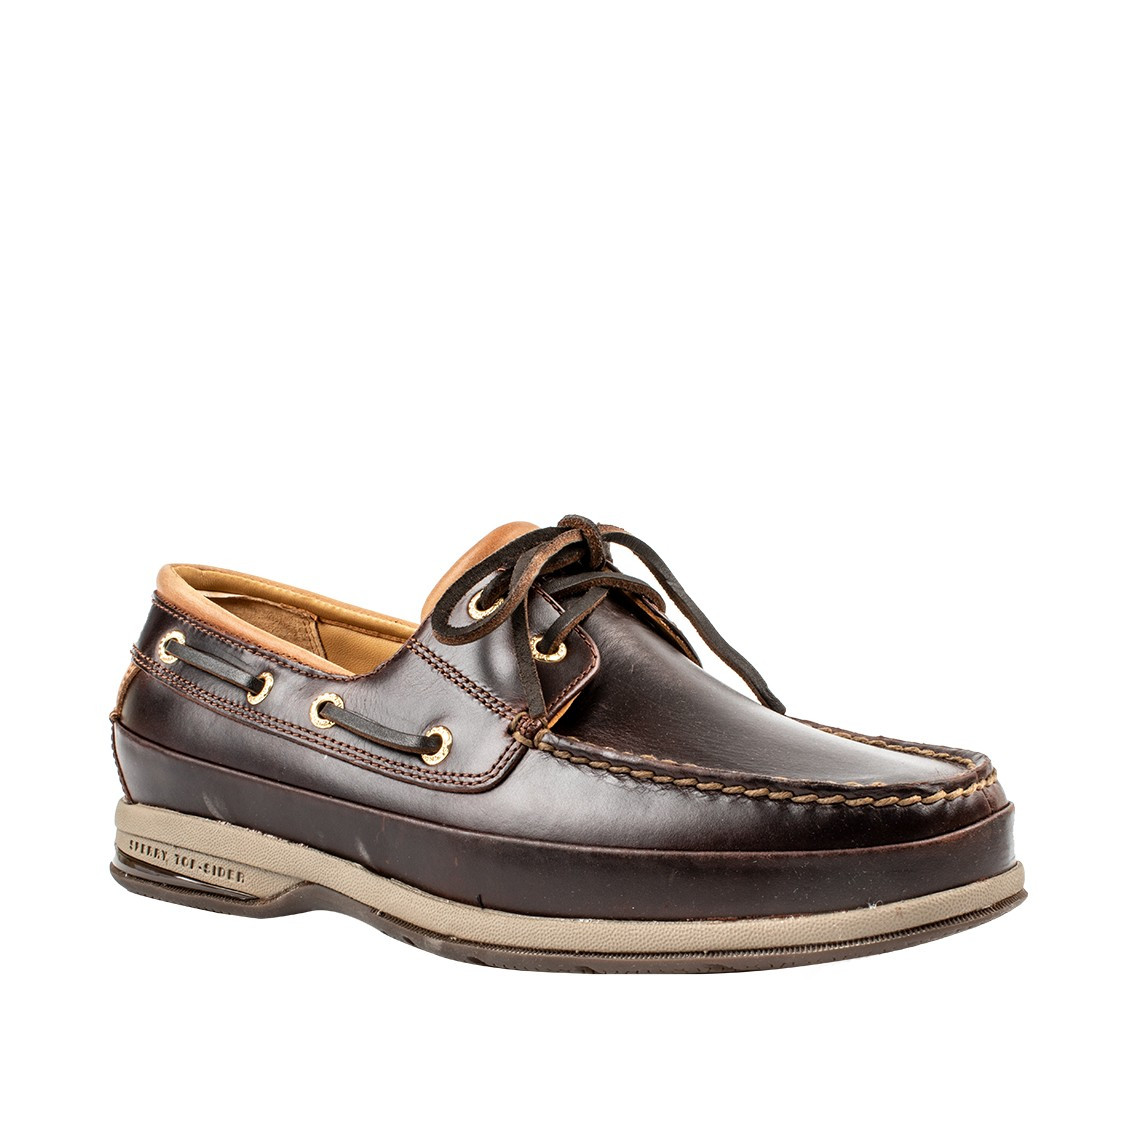 Sperry Shoes for Men Top-Siders, Boat Shoes, Slip-Ons